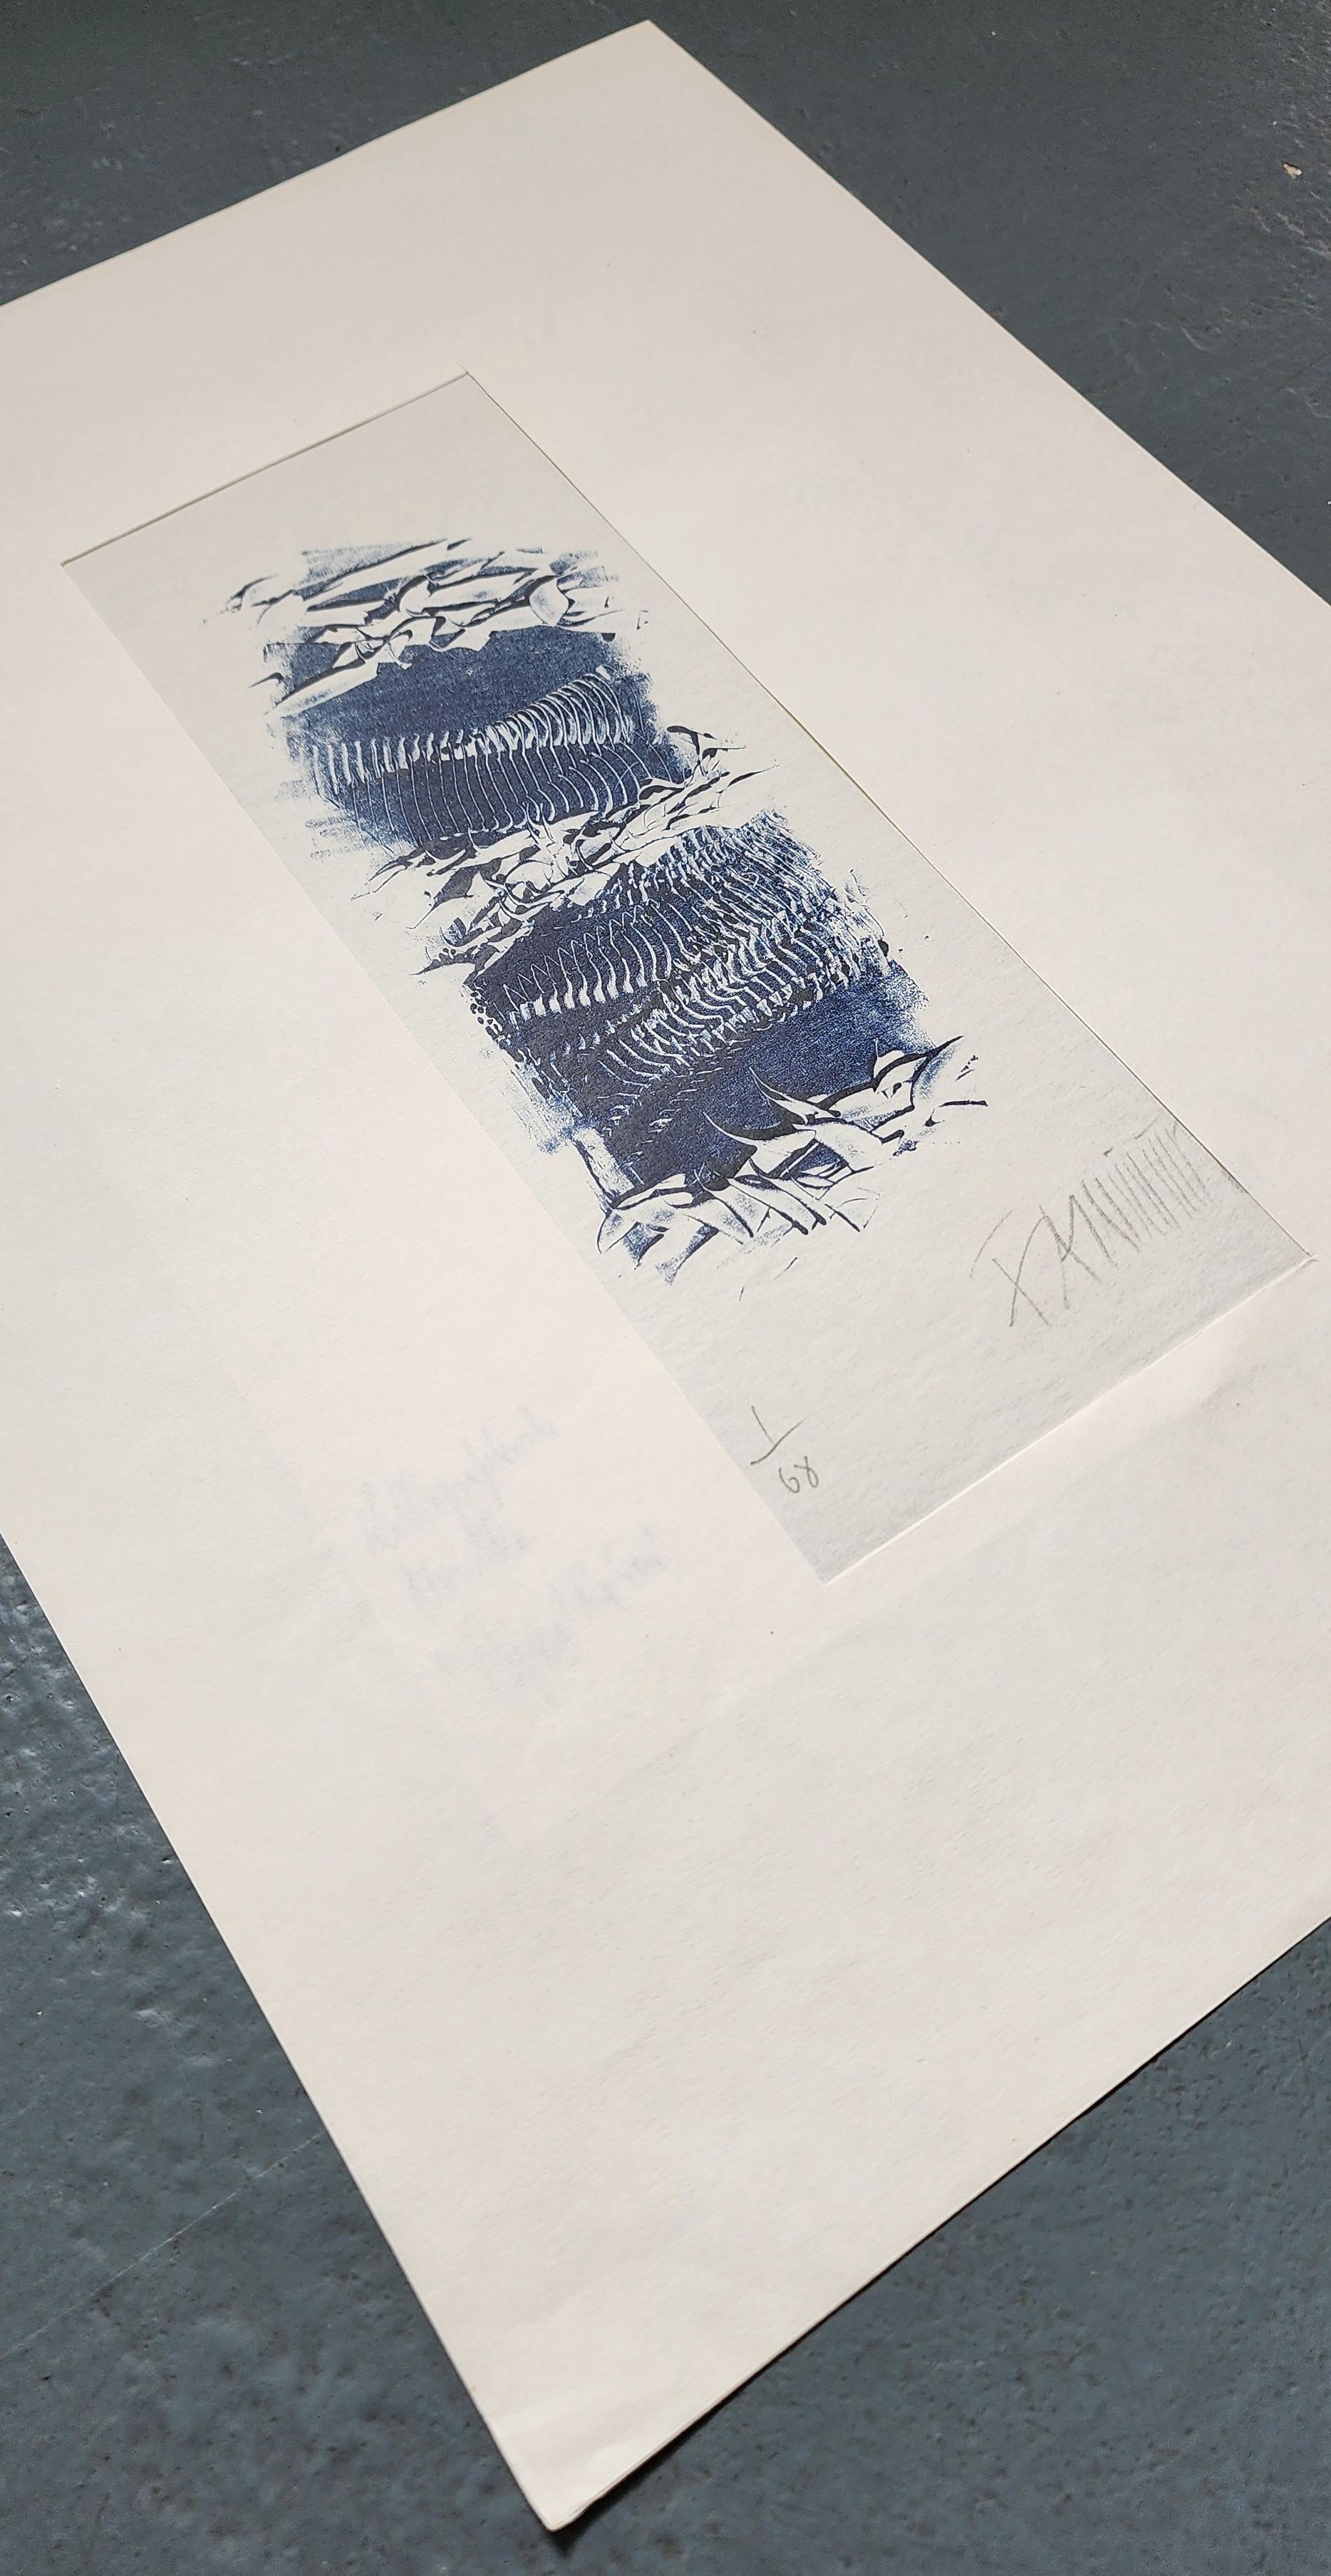 Fred Alfred Theophil Fathwinter
Untitled Abstract Composition
Monotype (mounted)
Year: 1968
Signed, dated and titled by hand
Size: 10.8×3.7in on 16.9×12.0in 
COA provided
Ref.: 924802-1186

Fathwinter, artist name for Franz Alfred Theophil Winter